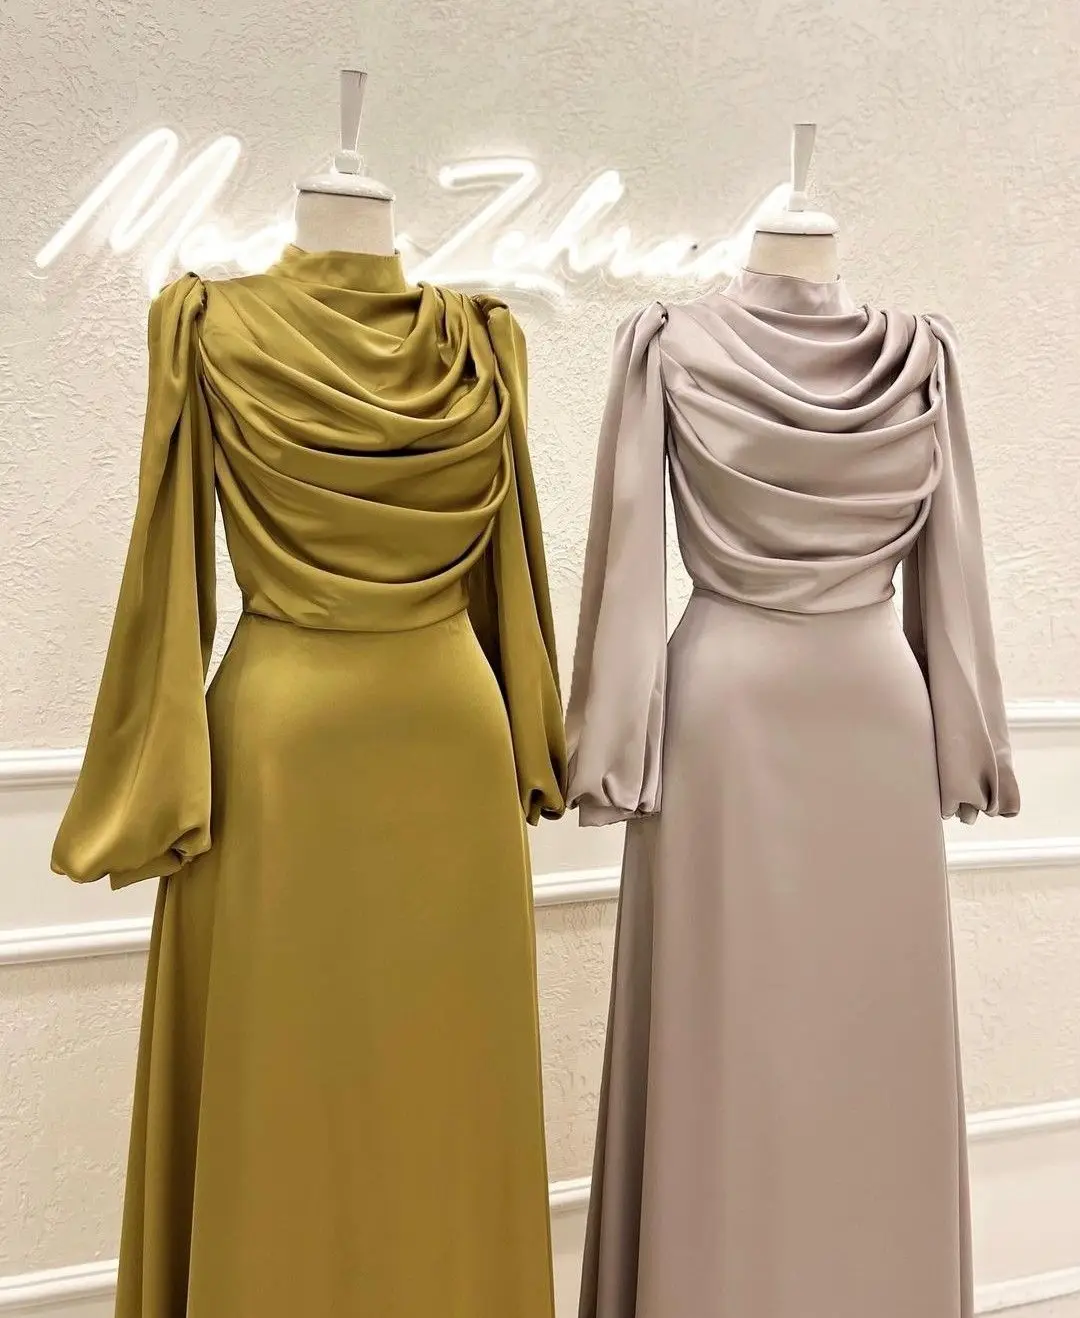 New Latest Designs Traditional Muslim Clothing Robes Modest Dress ...